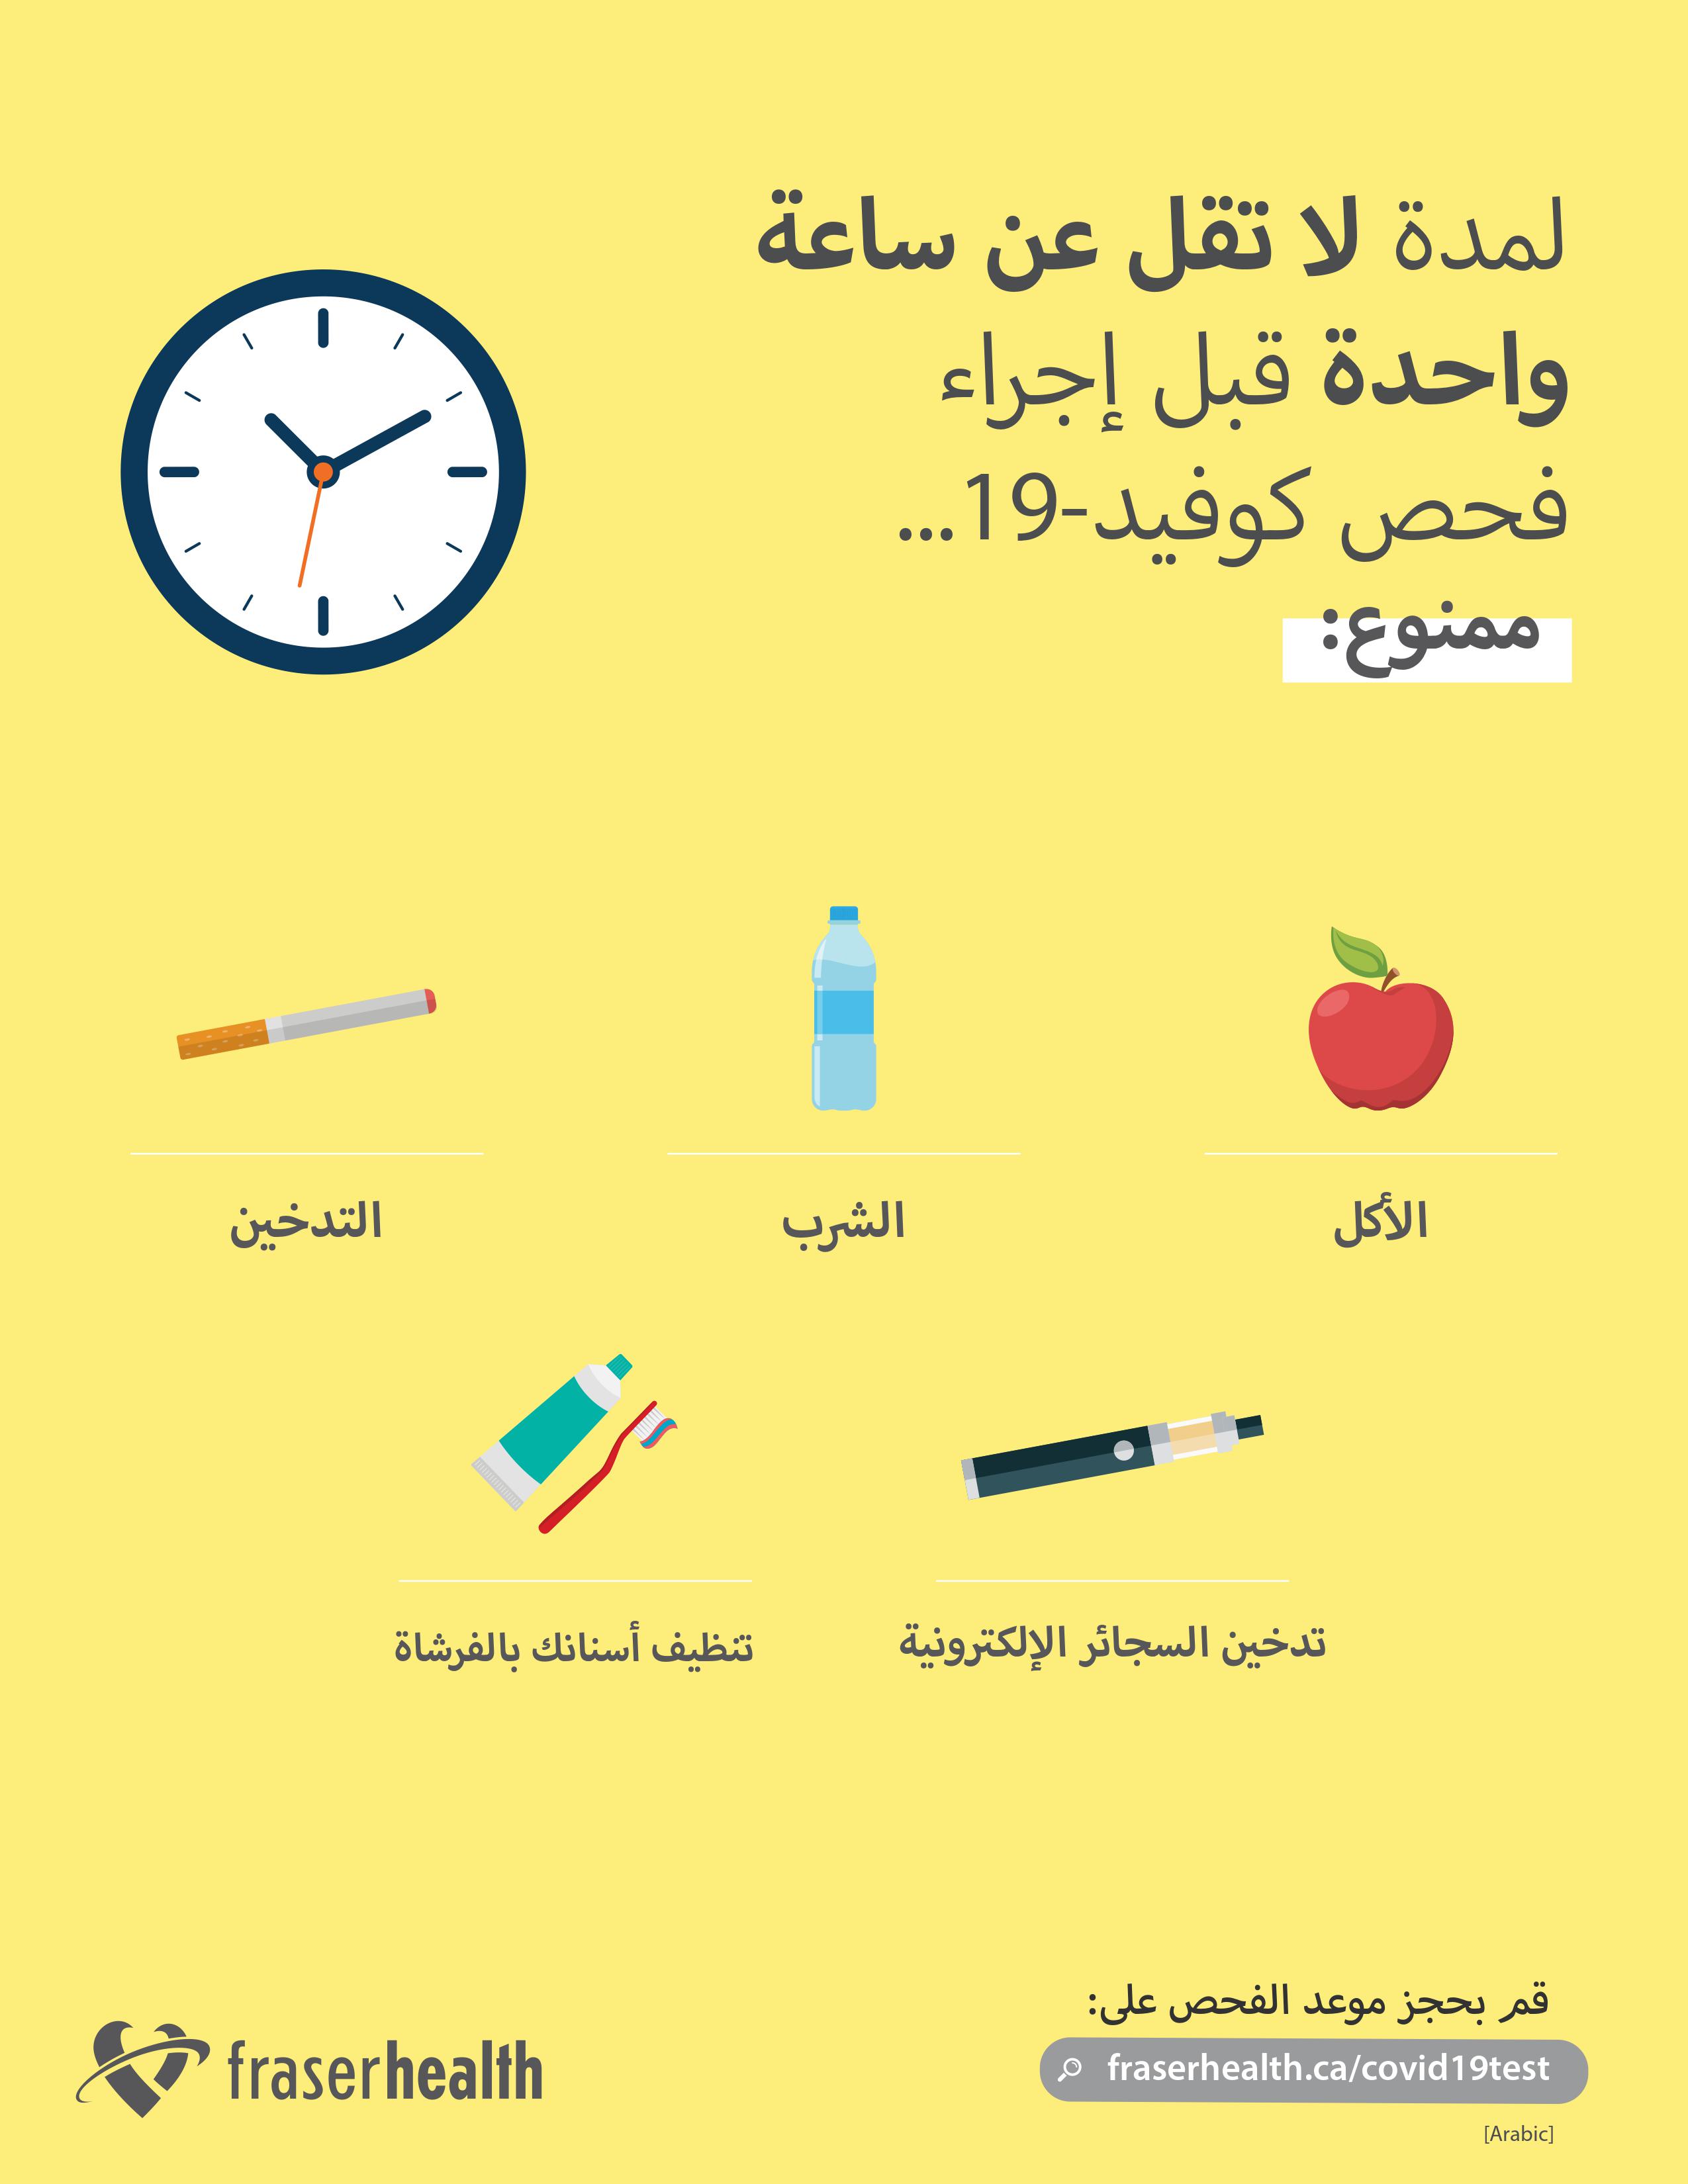 Instructions on how to prepare for your COVID-19 test in Arabic